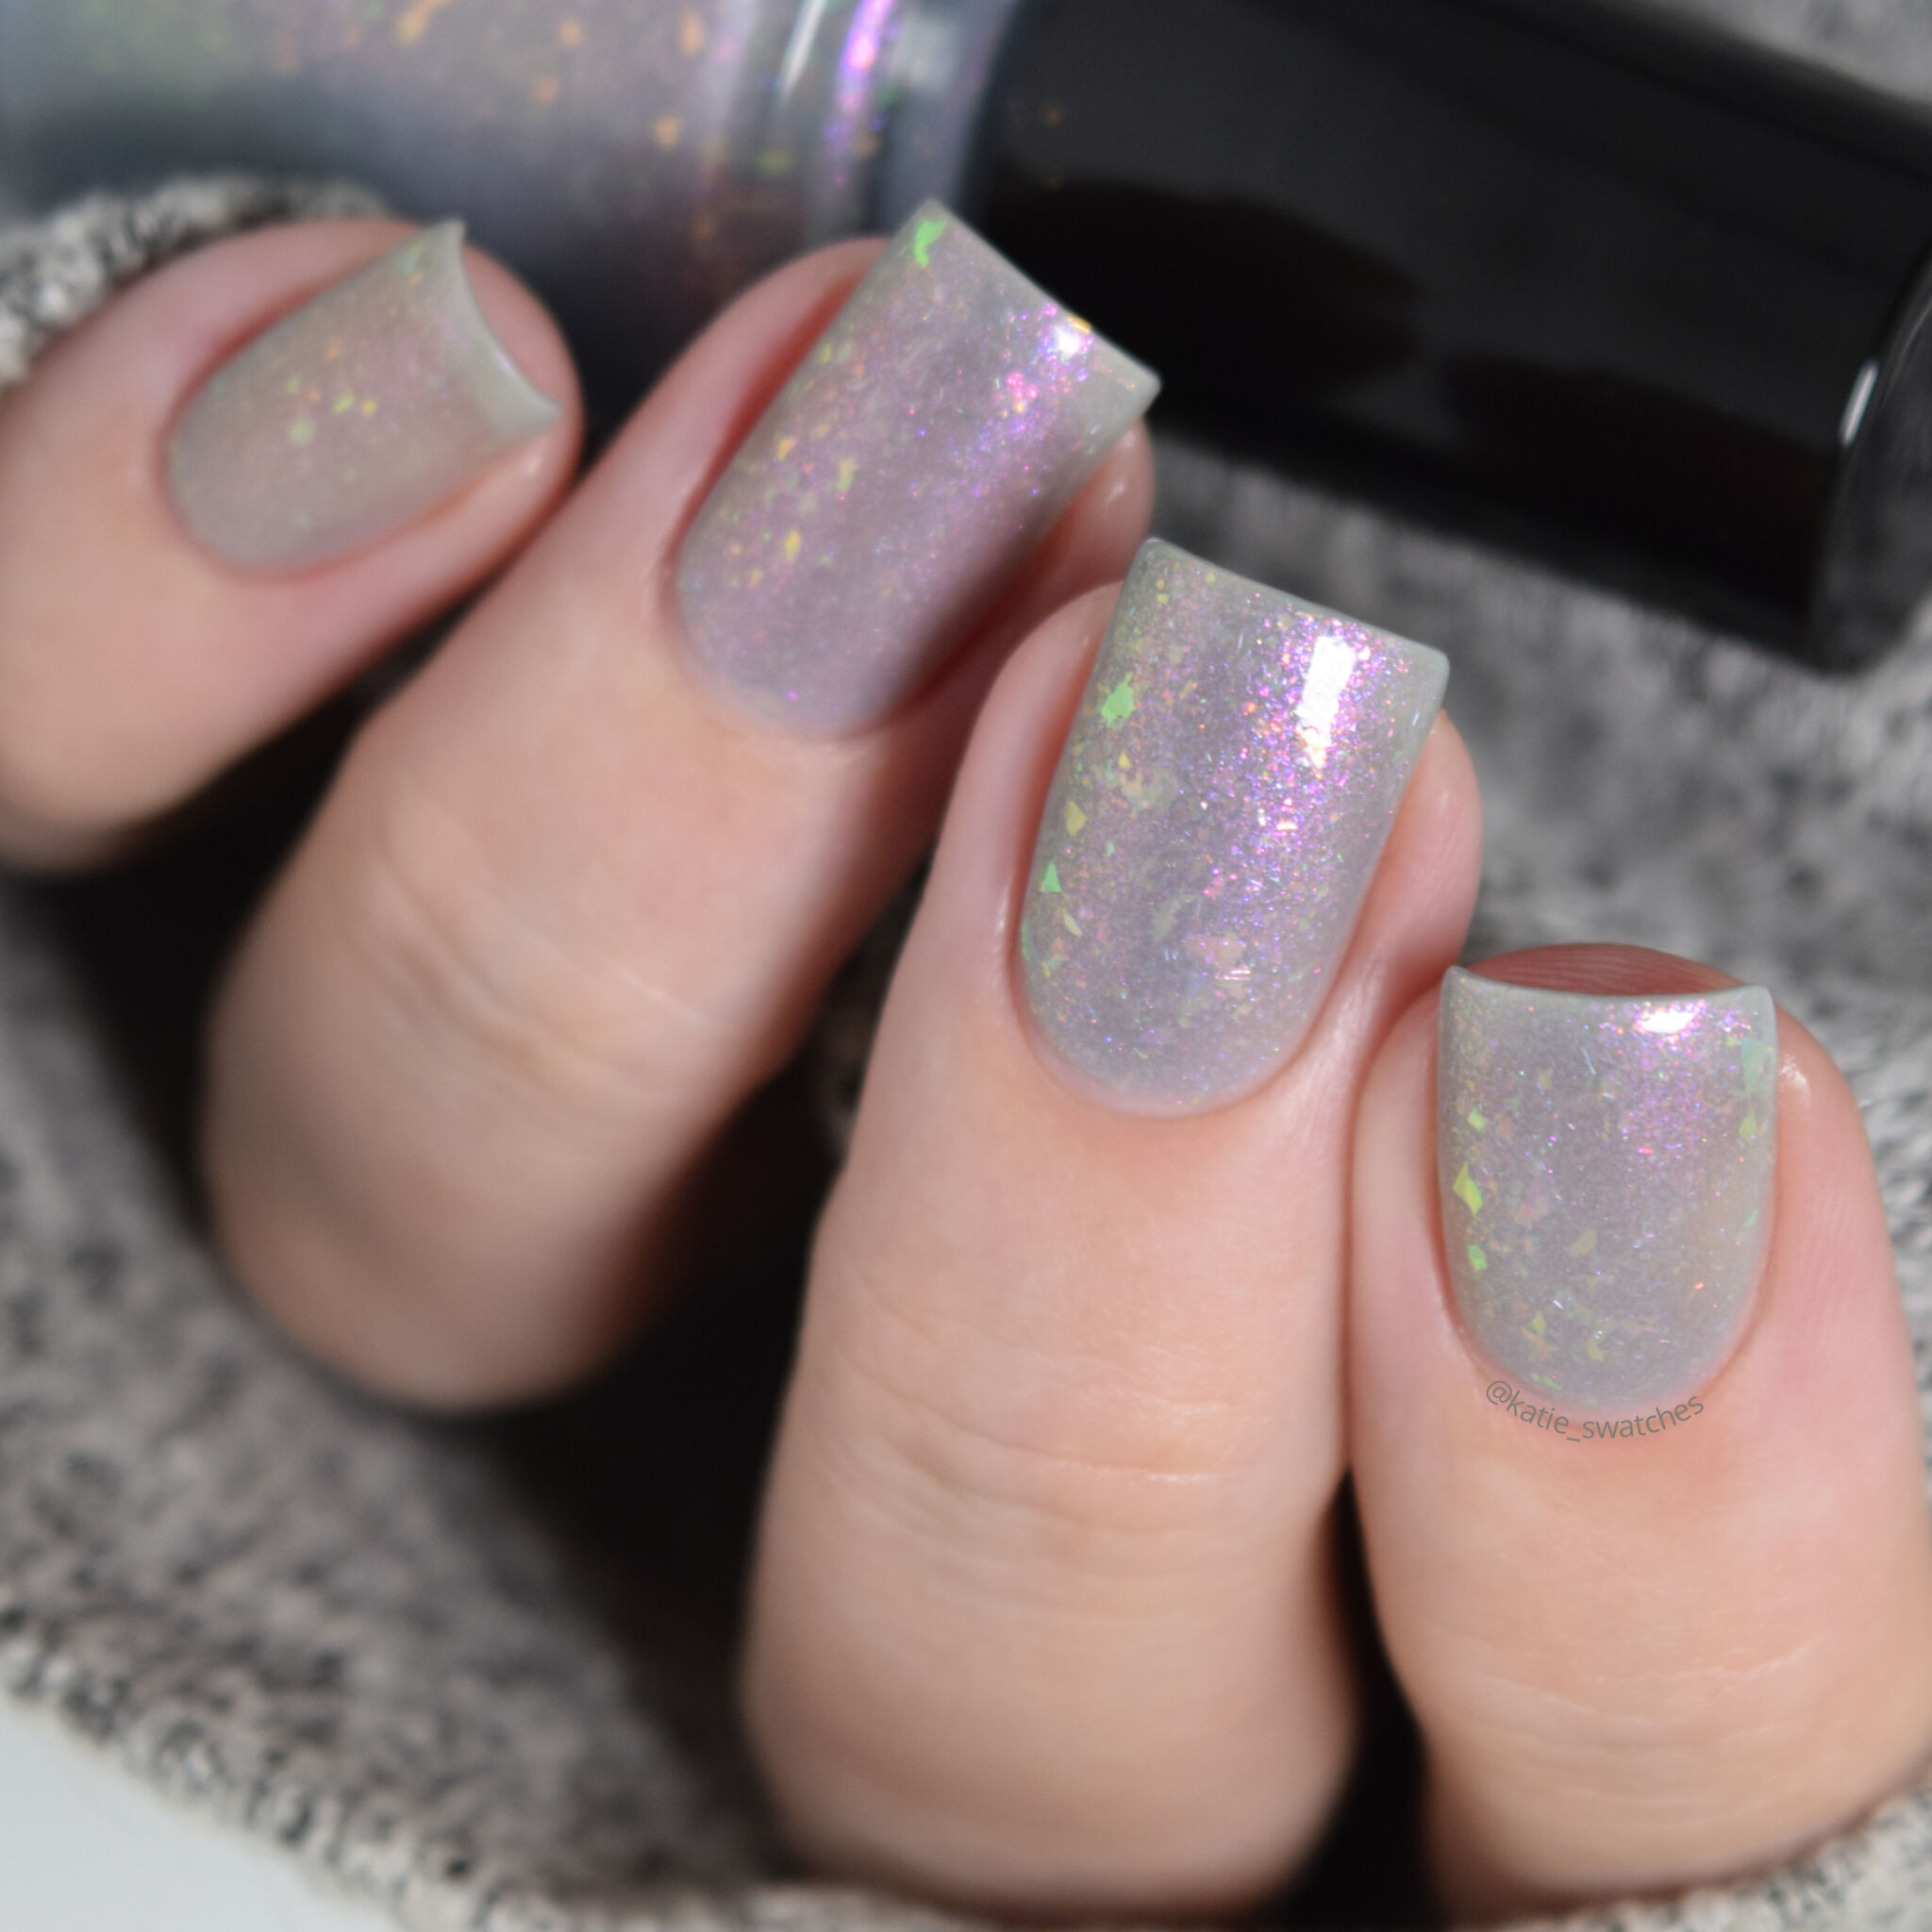 Girly Bits - Thistle While You Work sheer shimmer/flakie nail polish swatch